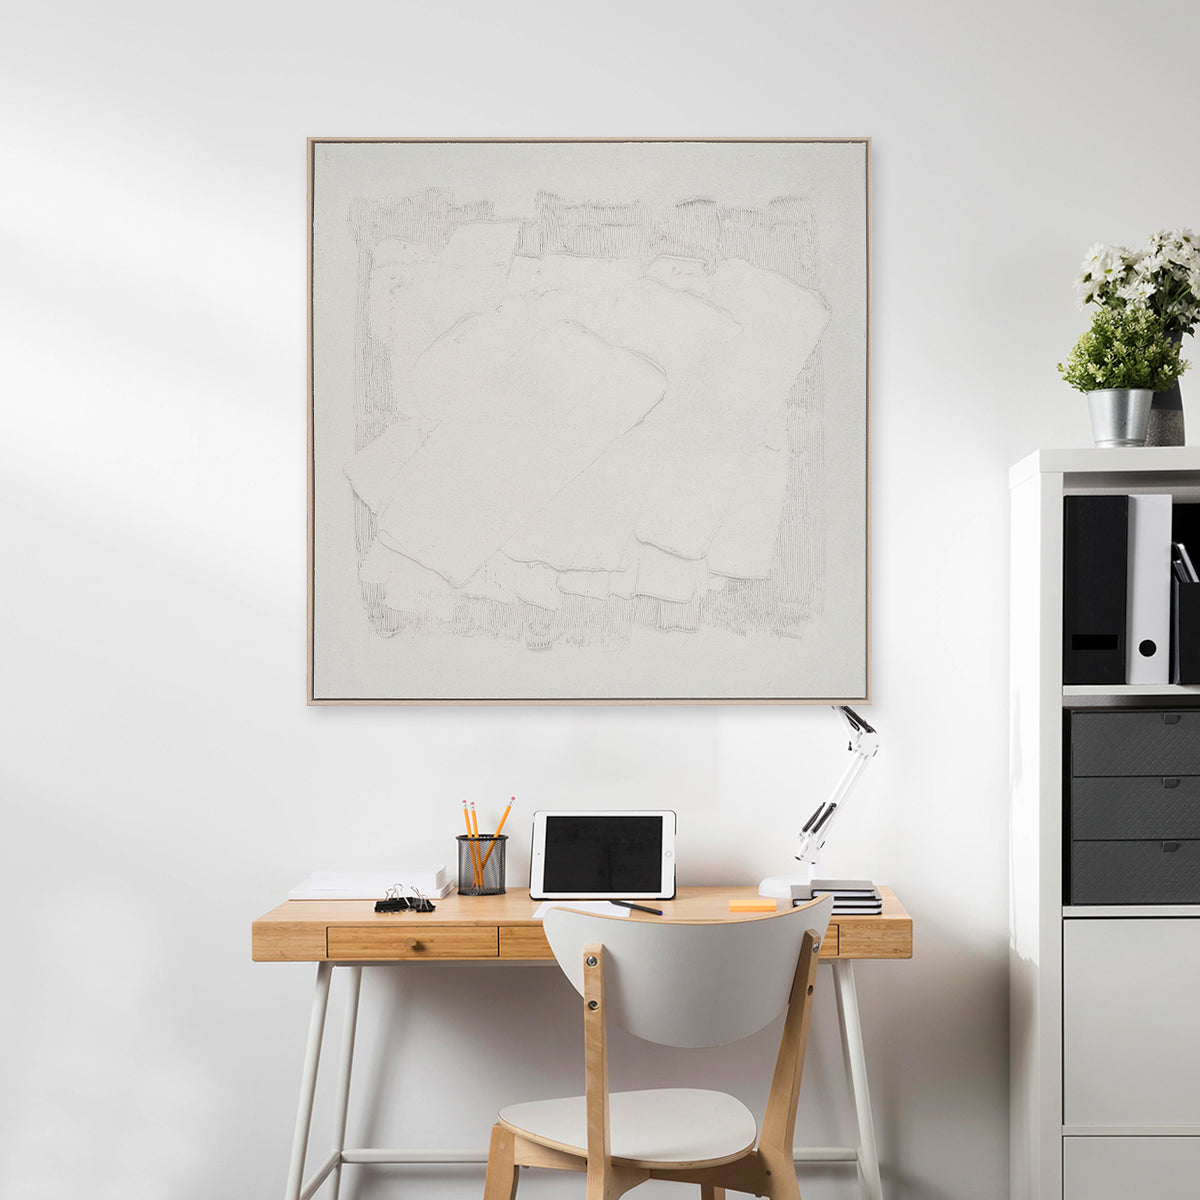 Abstract textured wall art affordable oil painting framed white concrete square large in study room office